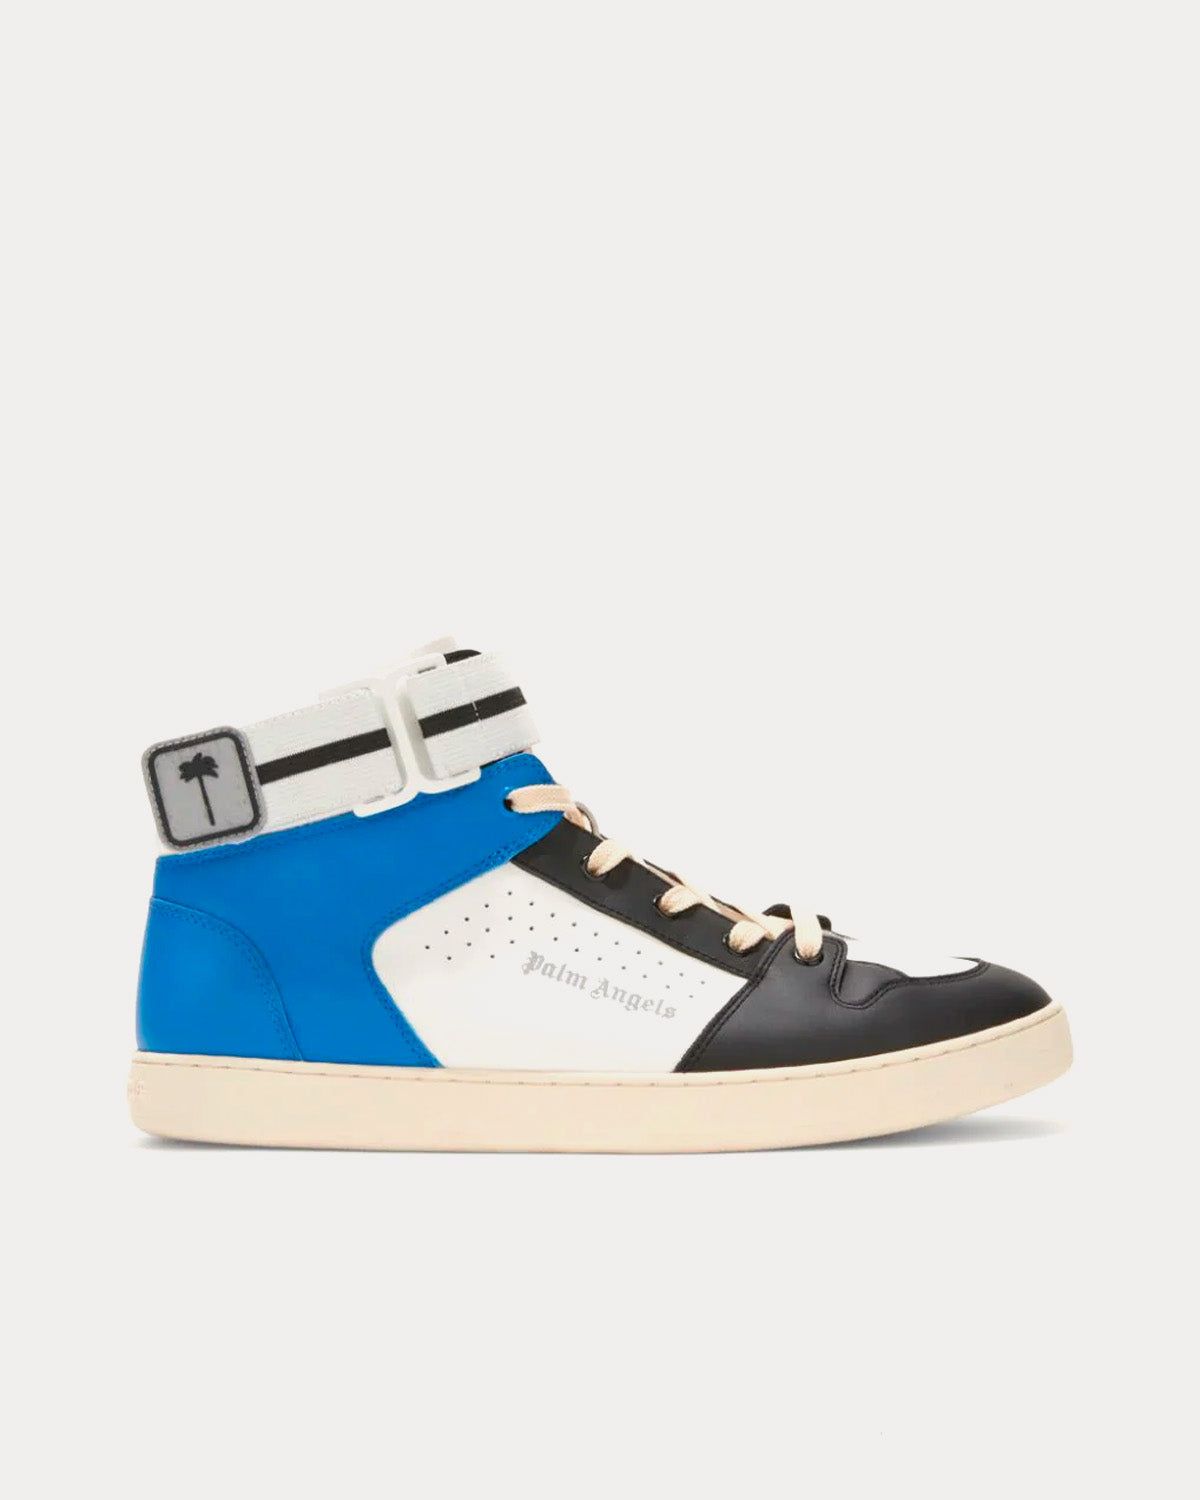 Palm Angels - Palm One White / Blue High Top Sneakers